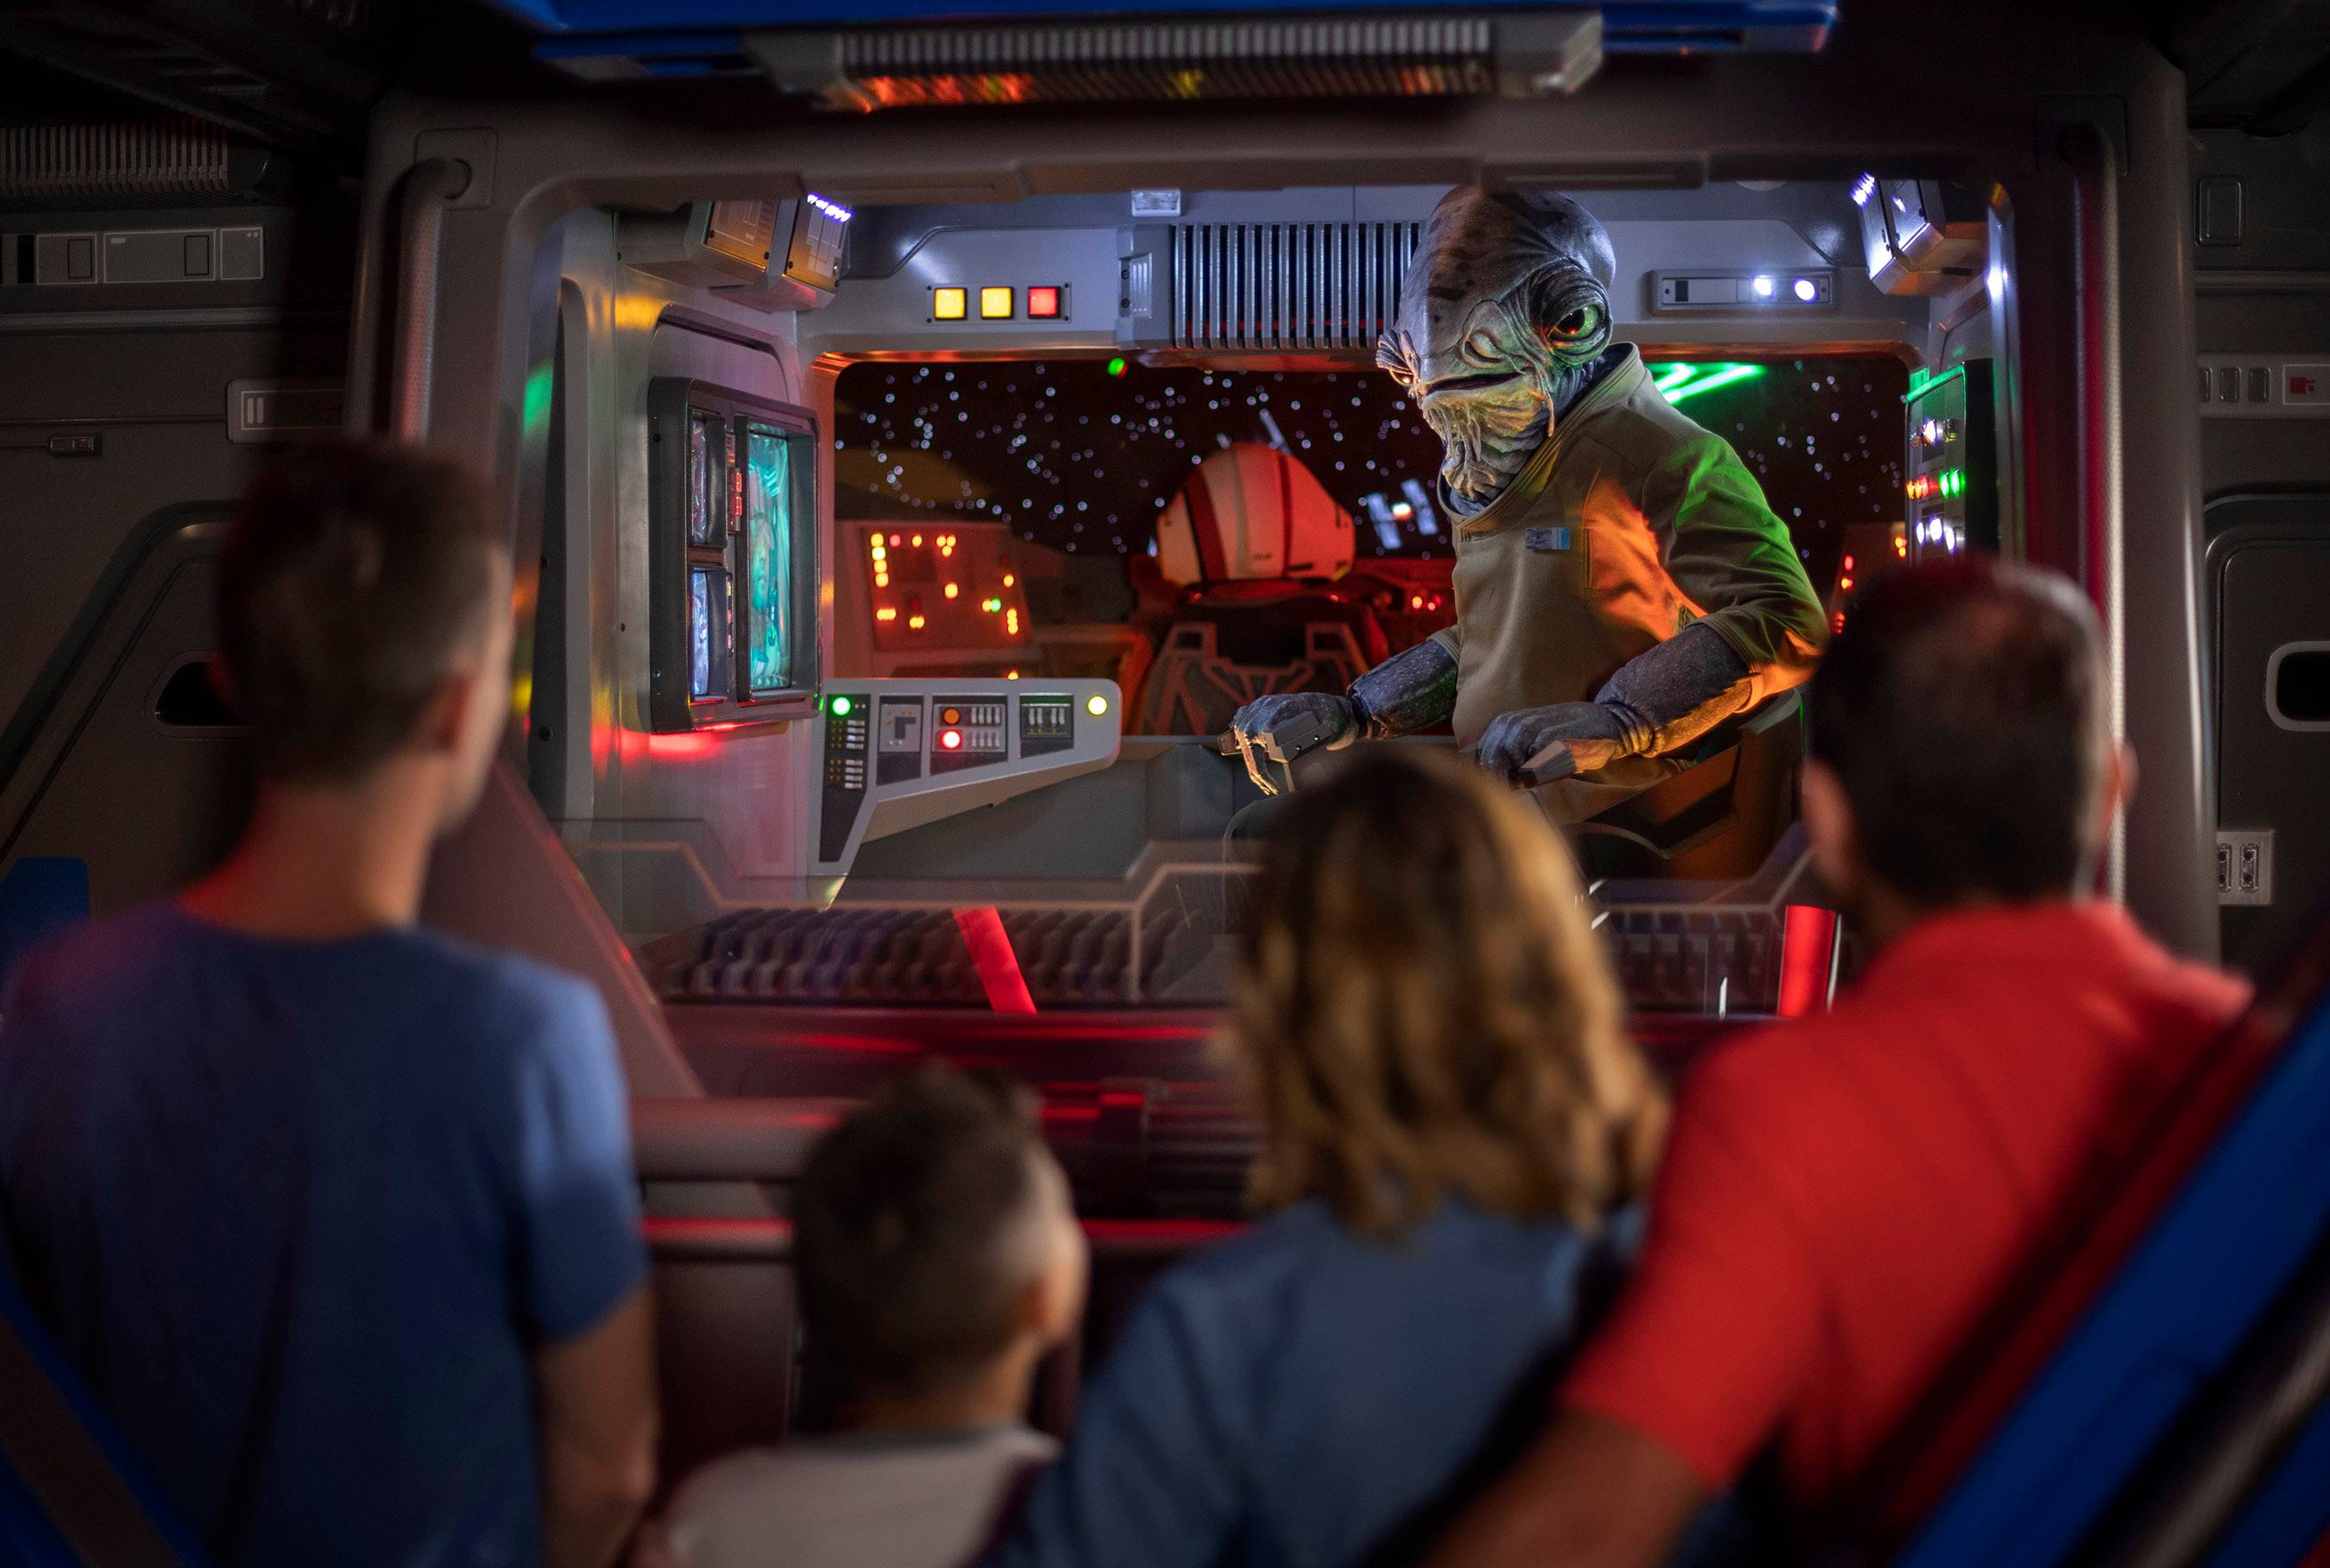 Inside the I-TS transport at Star Wars: Rise of the Resistance